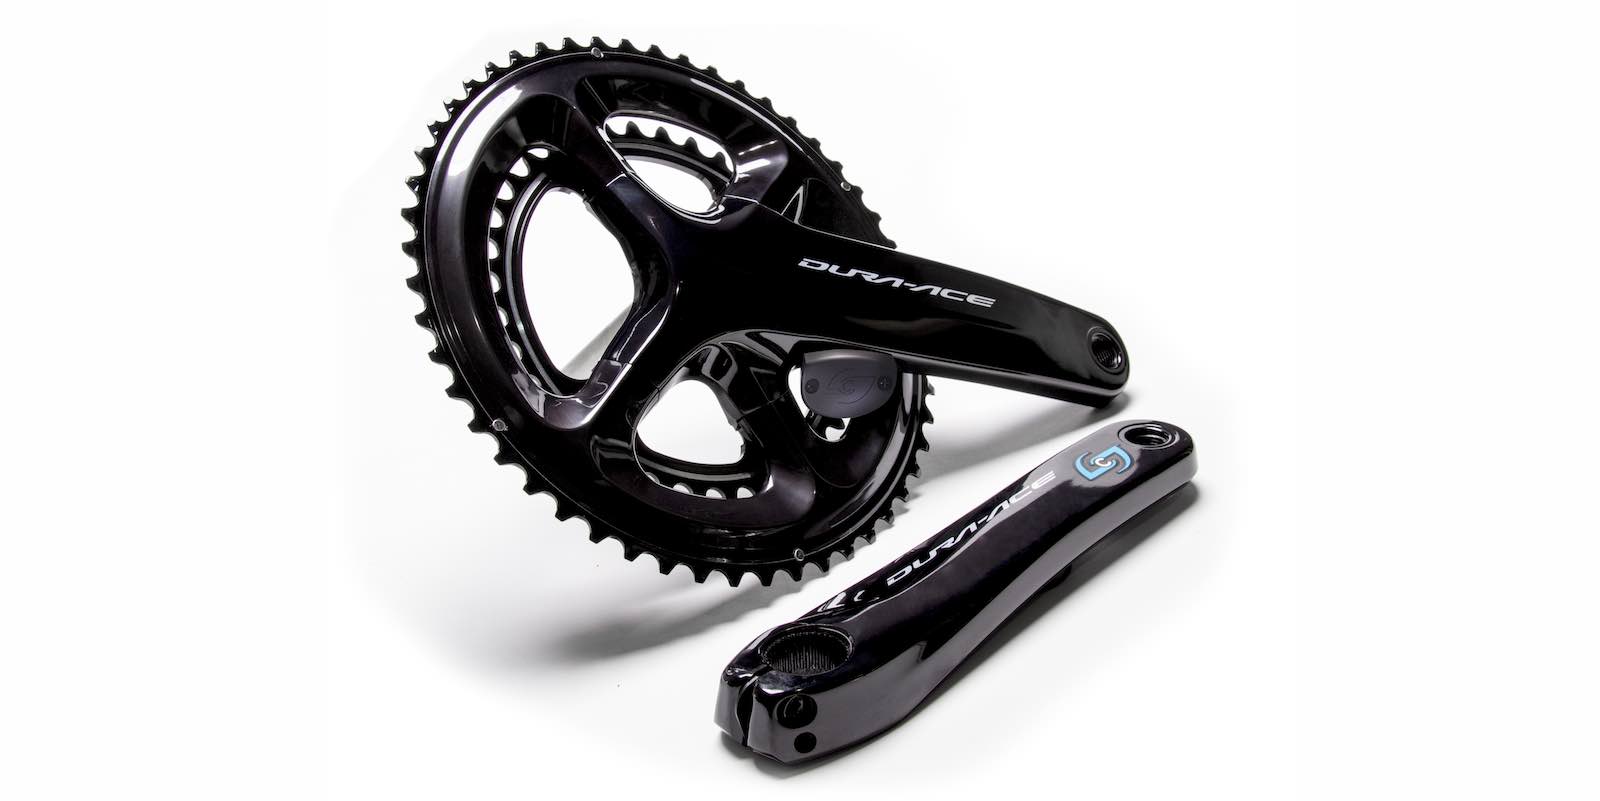 lower prices and discounts on stages power meter crank arms